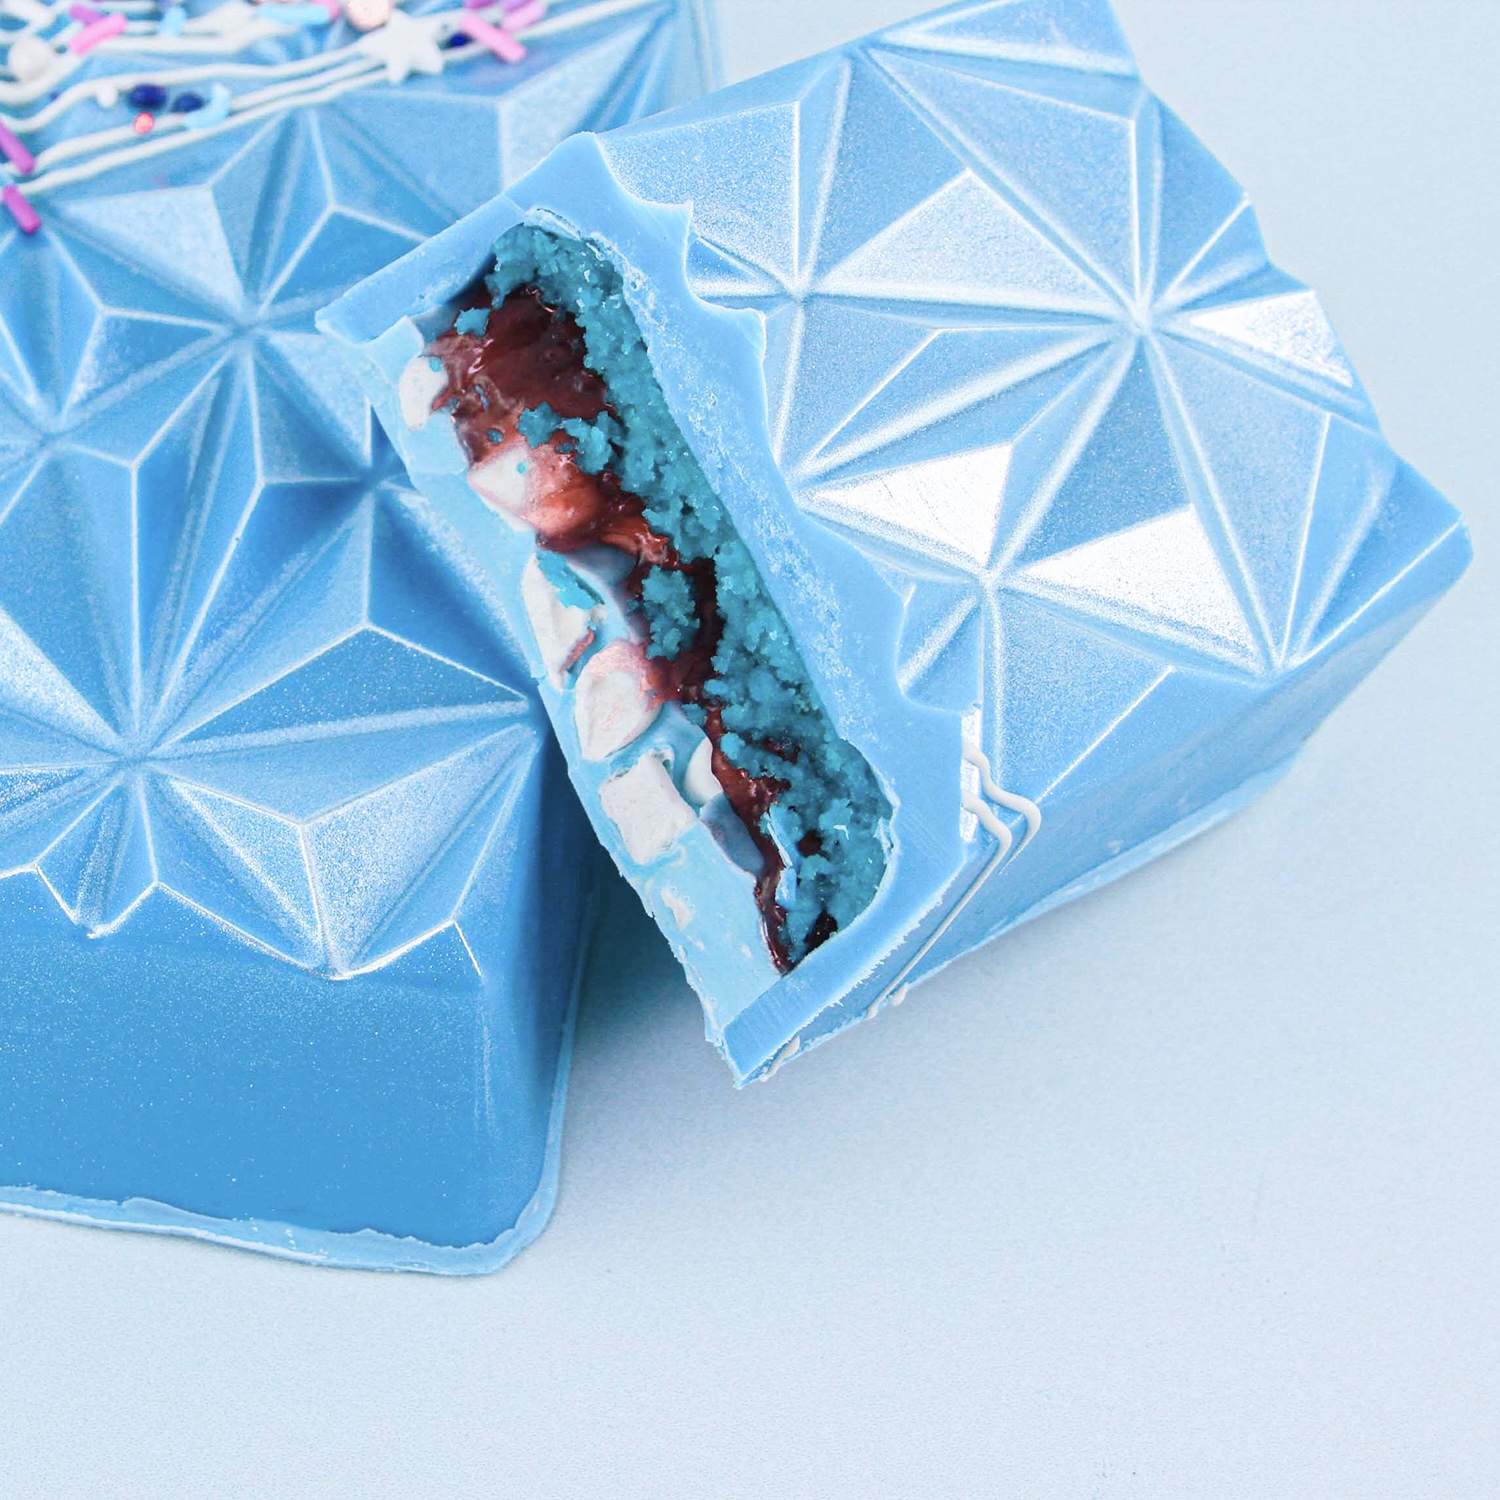 Geometric cakesicles with a blue candy outer shell. the inside is filled with cakesicle dough, raspberry filling and marshmallows.